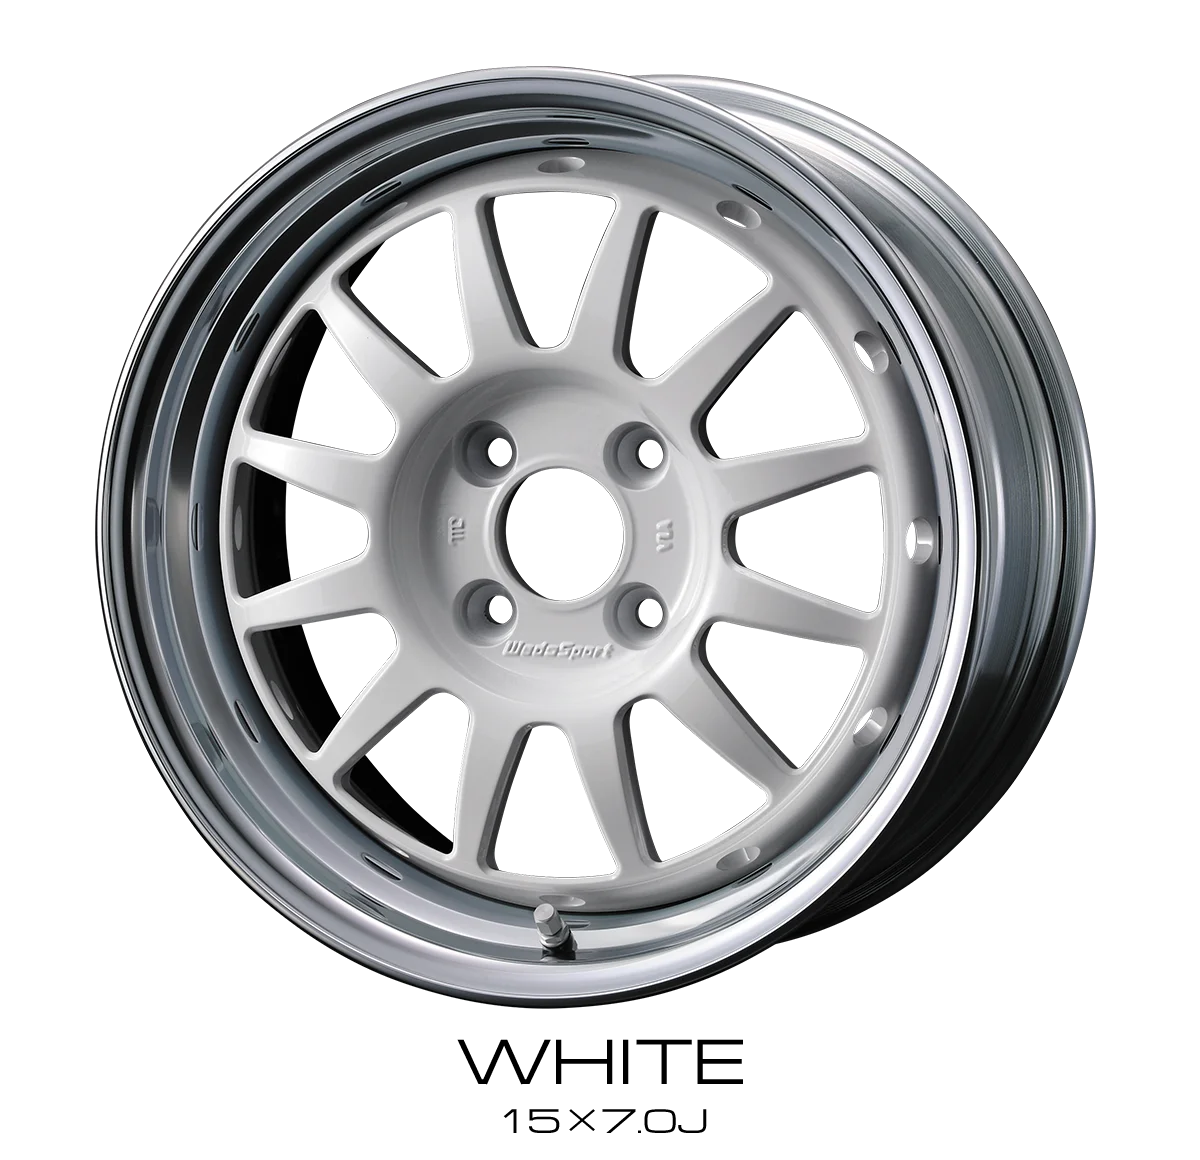 A Weds Sport silver wheel on a black background.